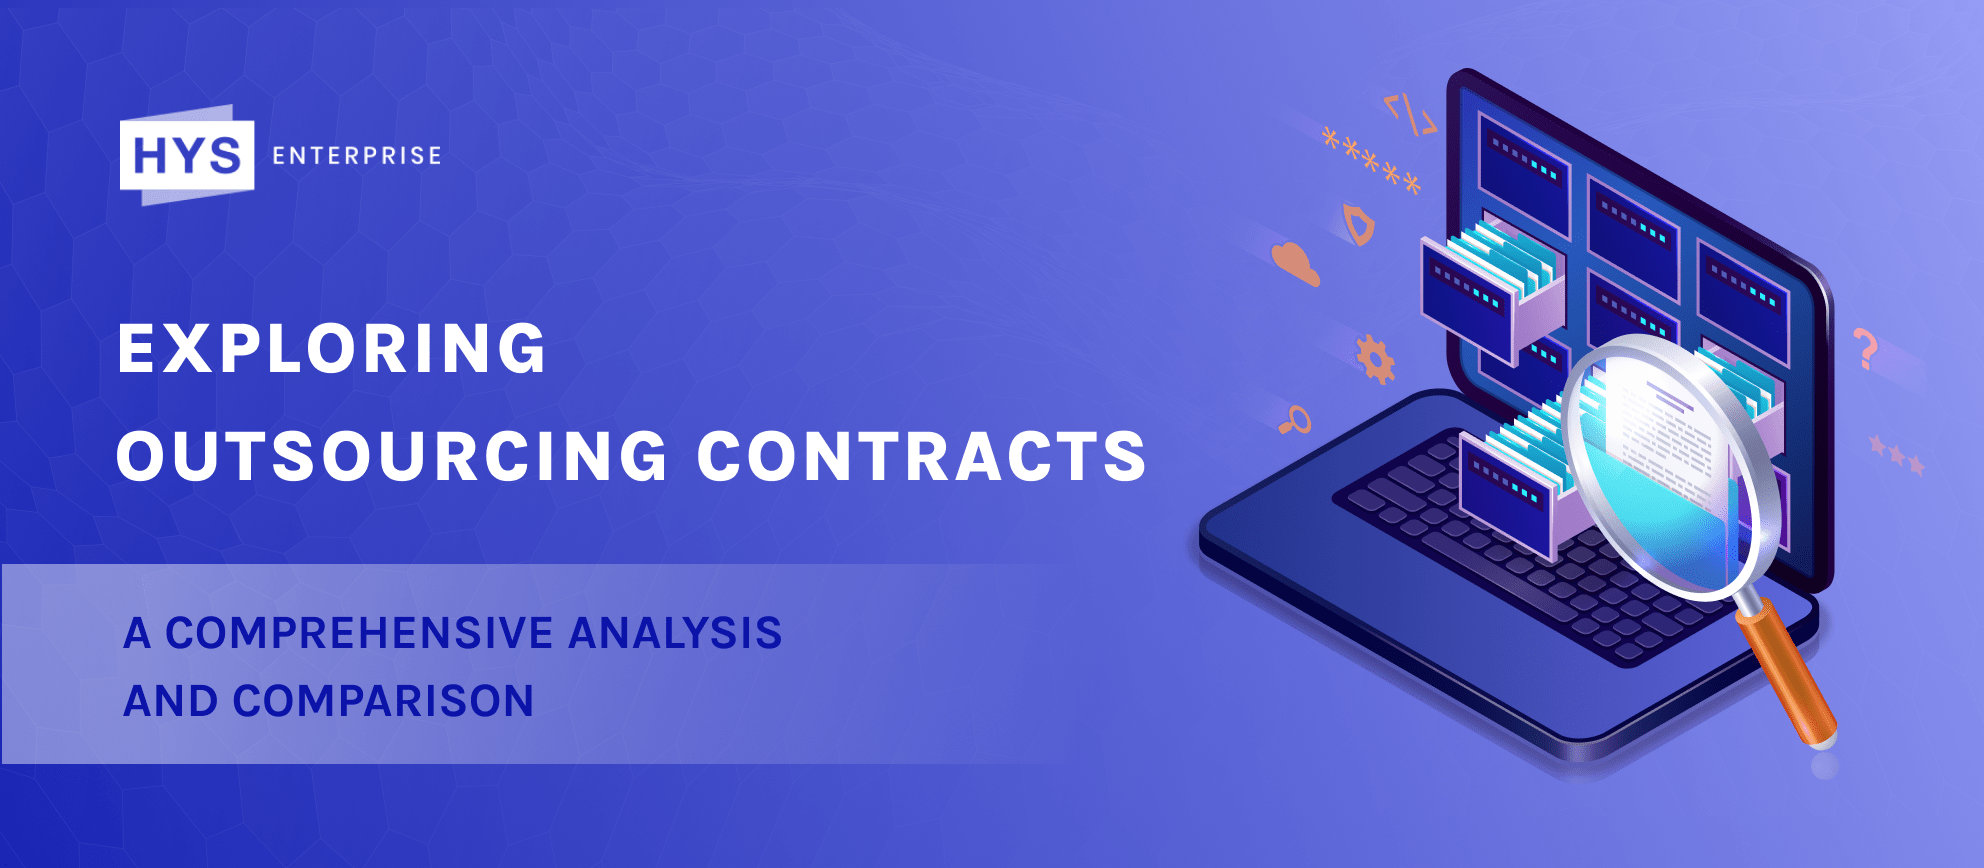 Exploring Outsourcing Contracts: a Comprehensive Analysis and Comparison